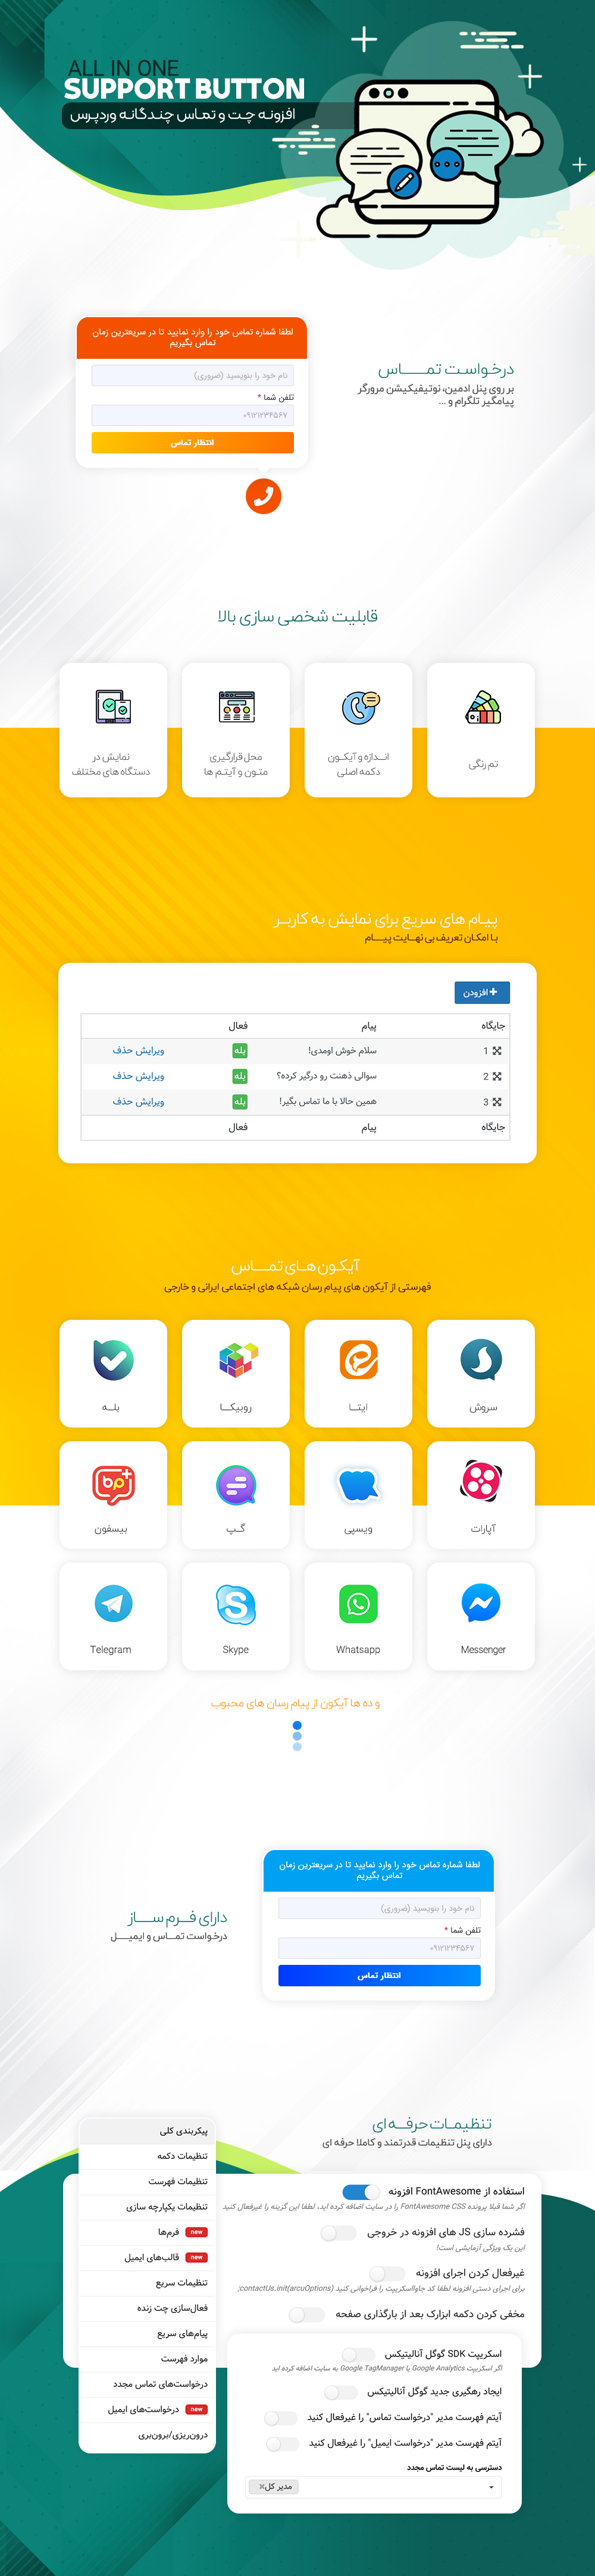 افزونه All in One Support Button